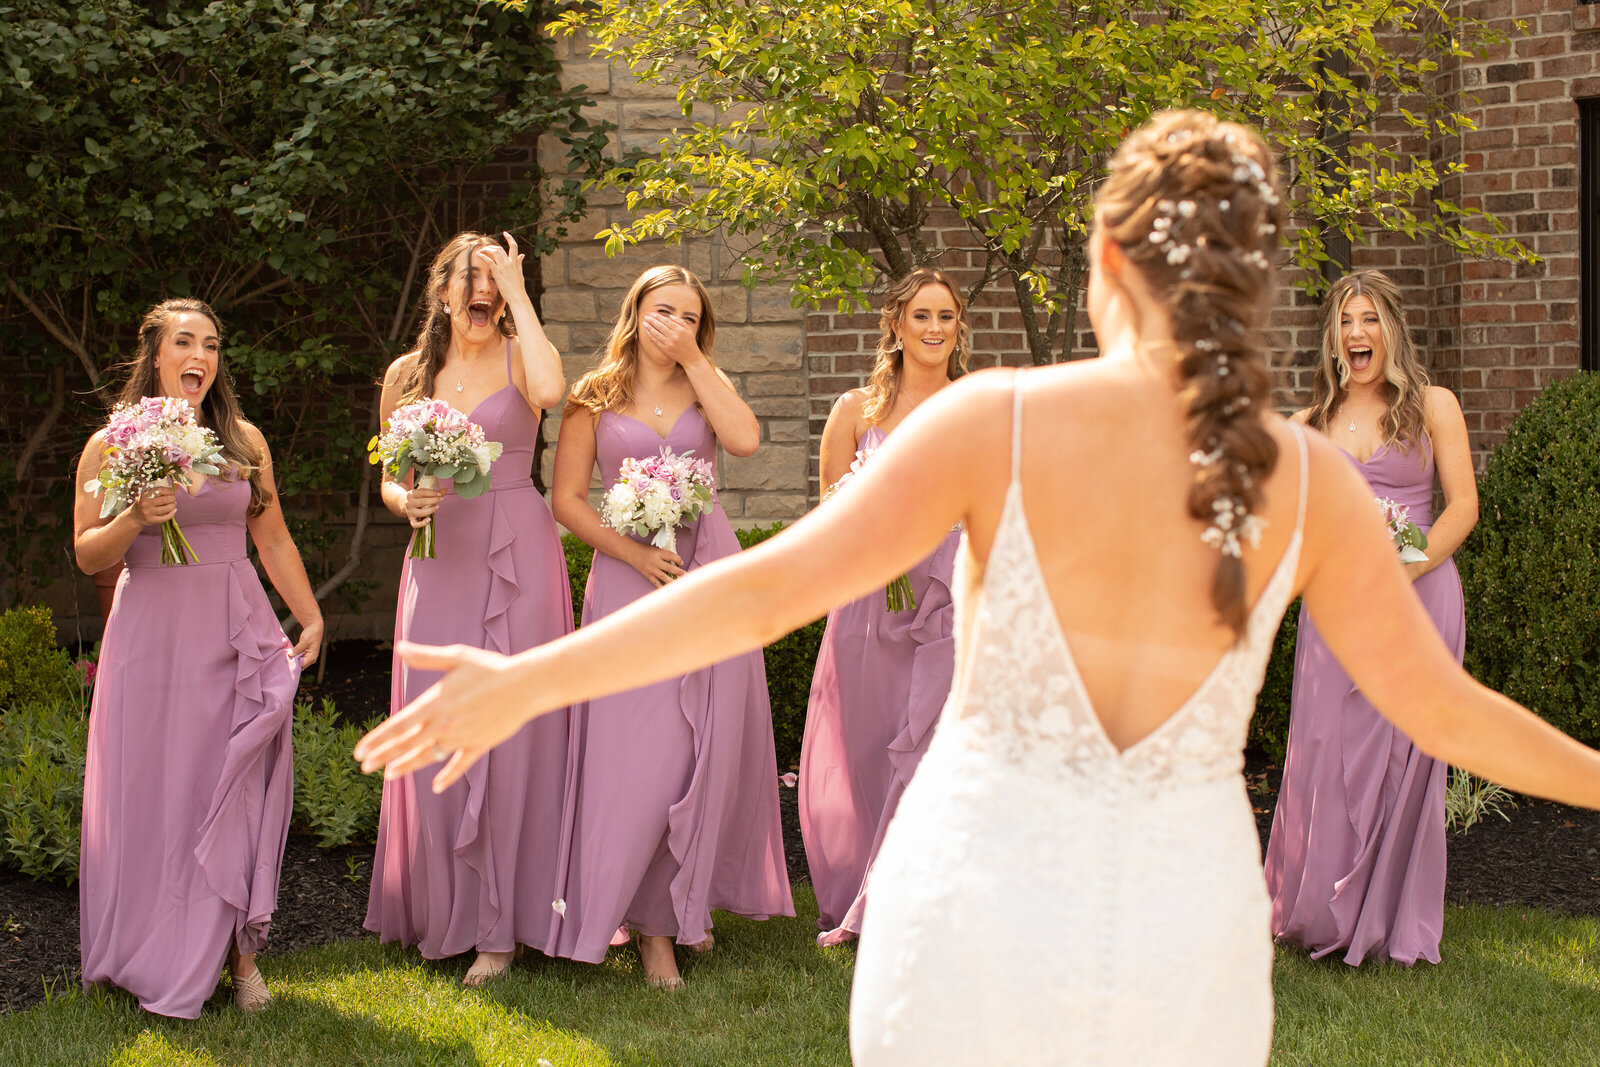 Bride has a first look with her bridesmaids on wedding day at Blue Heron Brewery & Event Center. Photo taken by Aaron Aldhizer